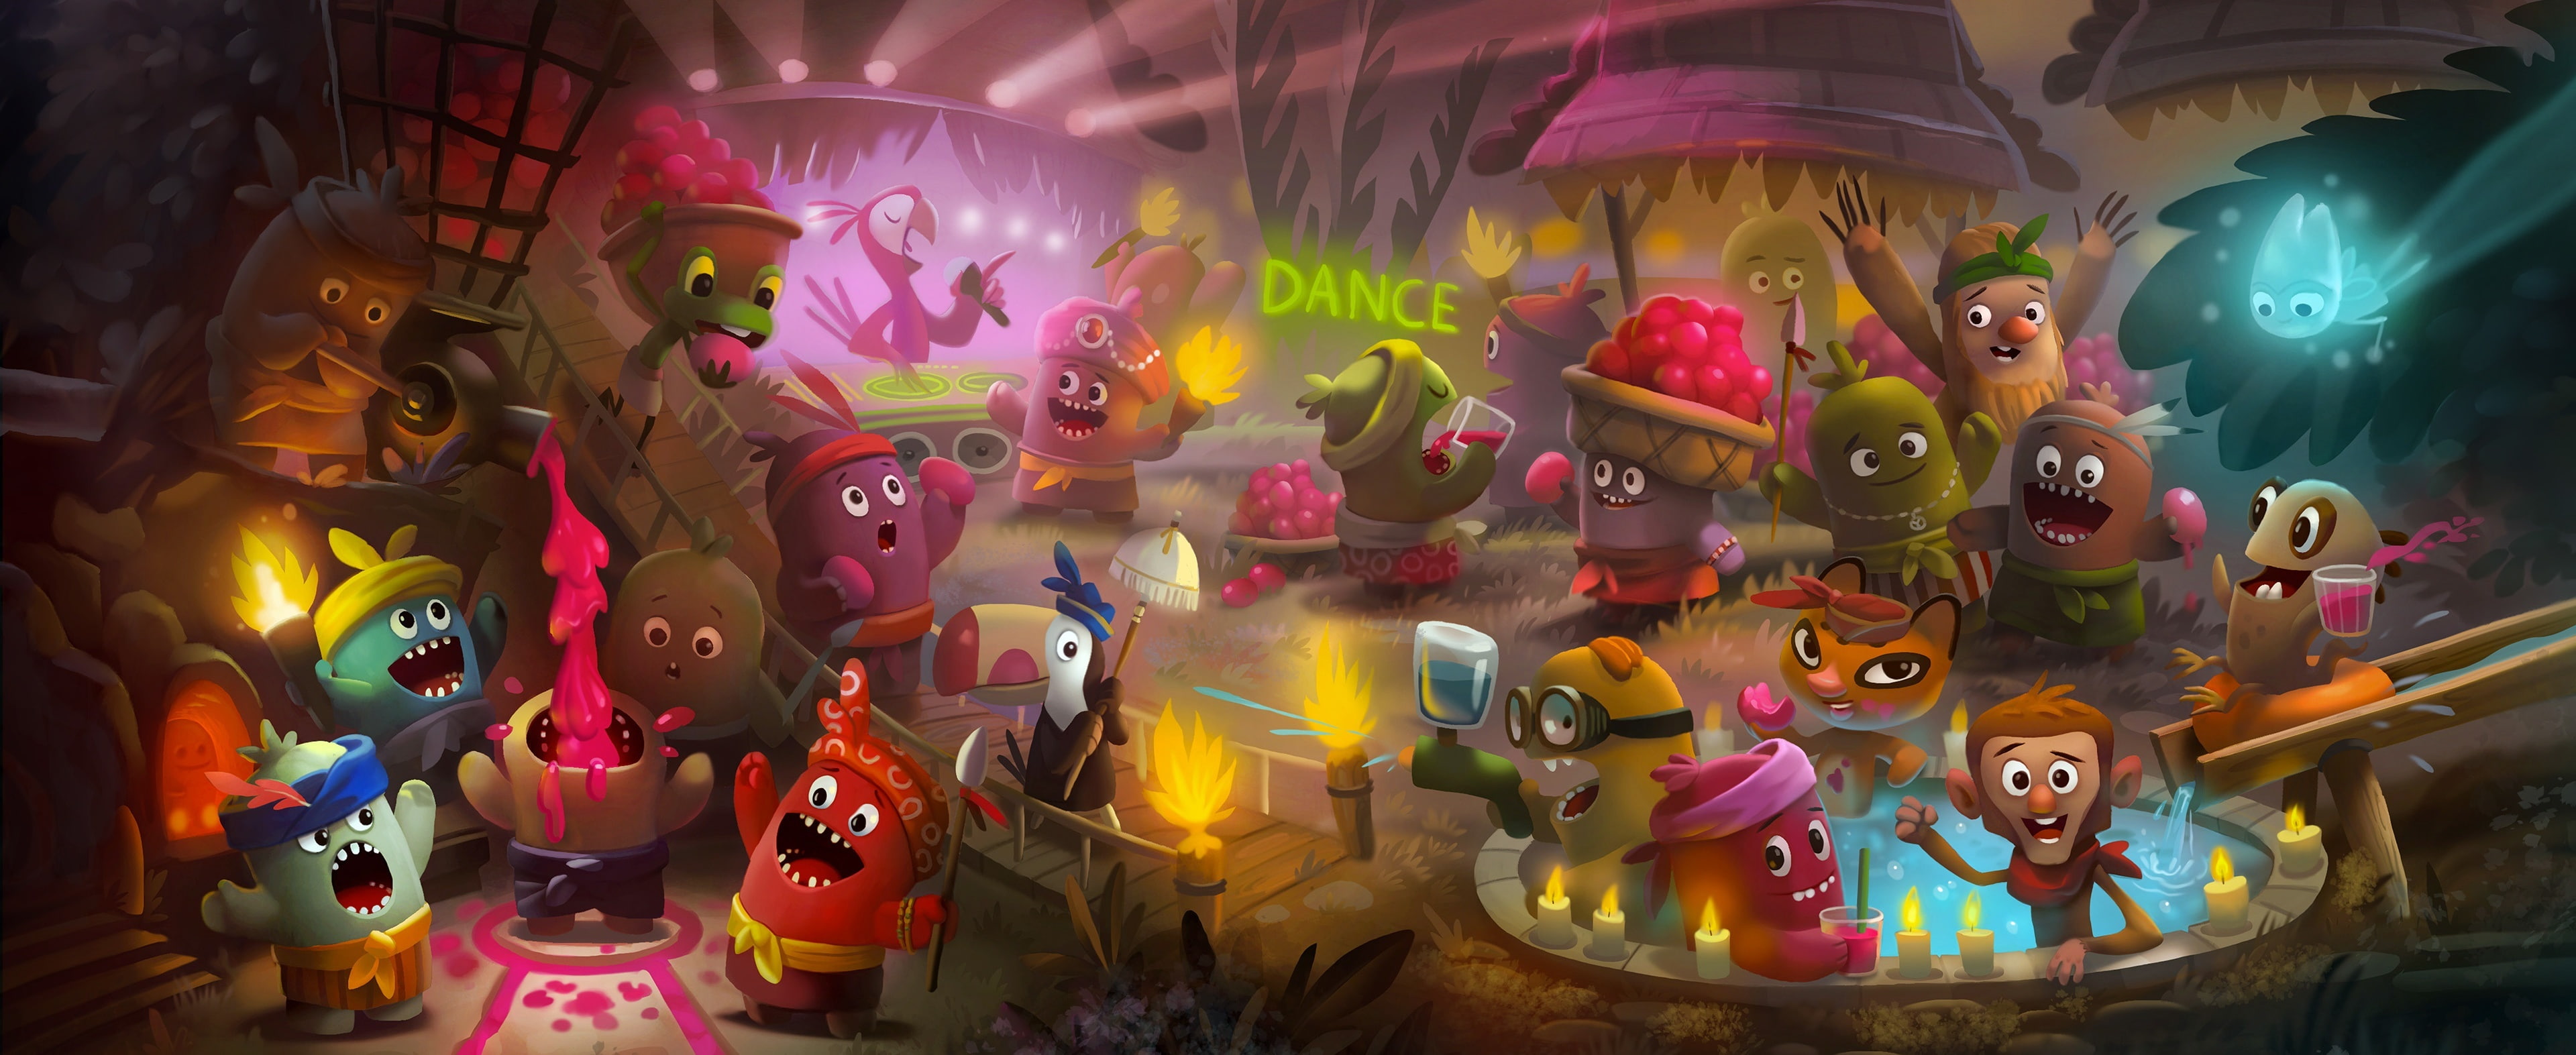 Cute Little Monsters Party Illustration, Artistic, Fantasy, Drawing